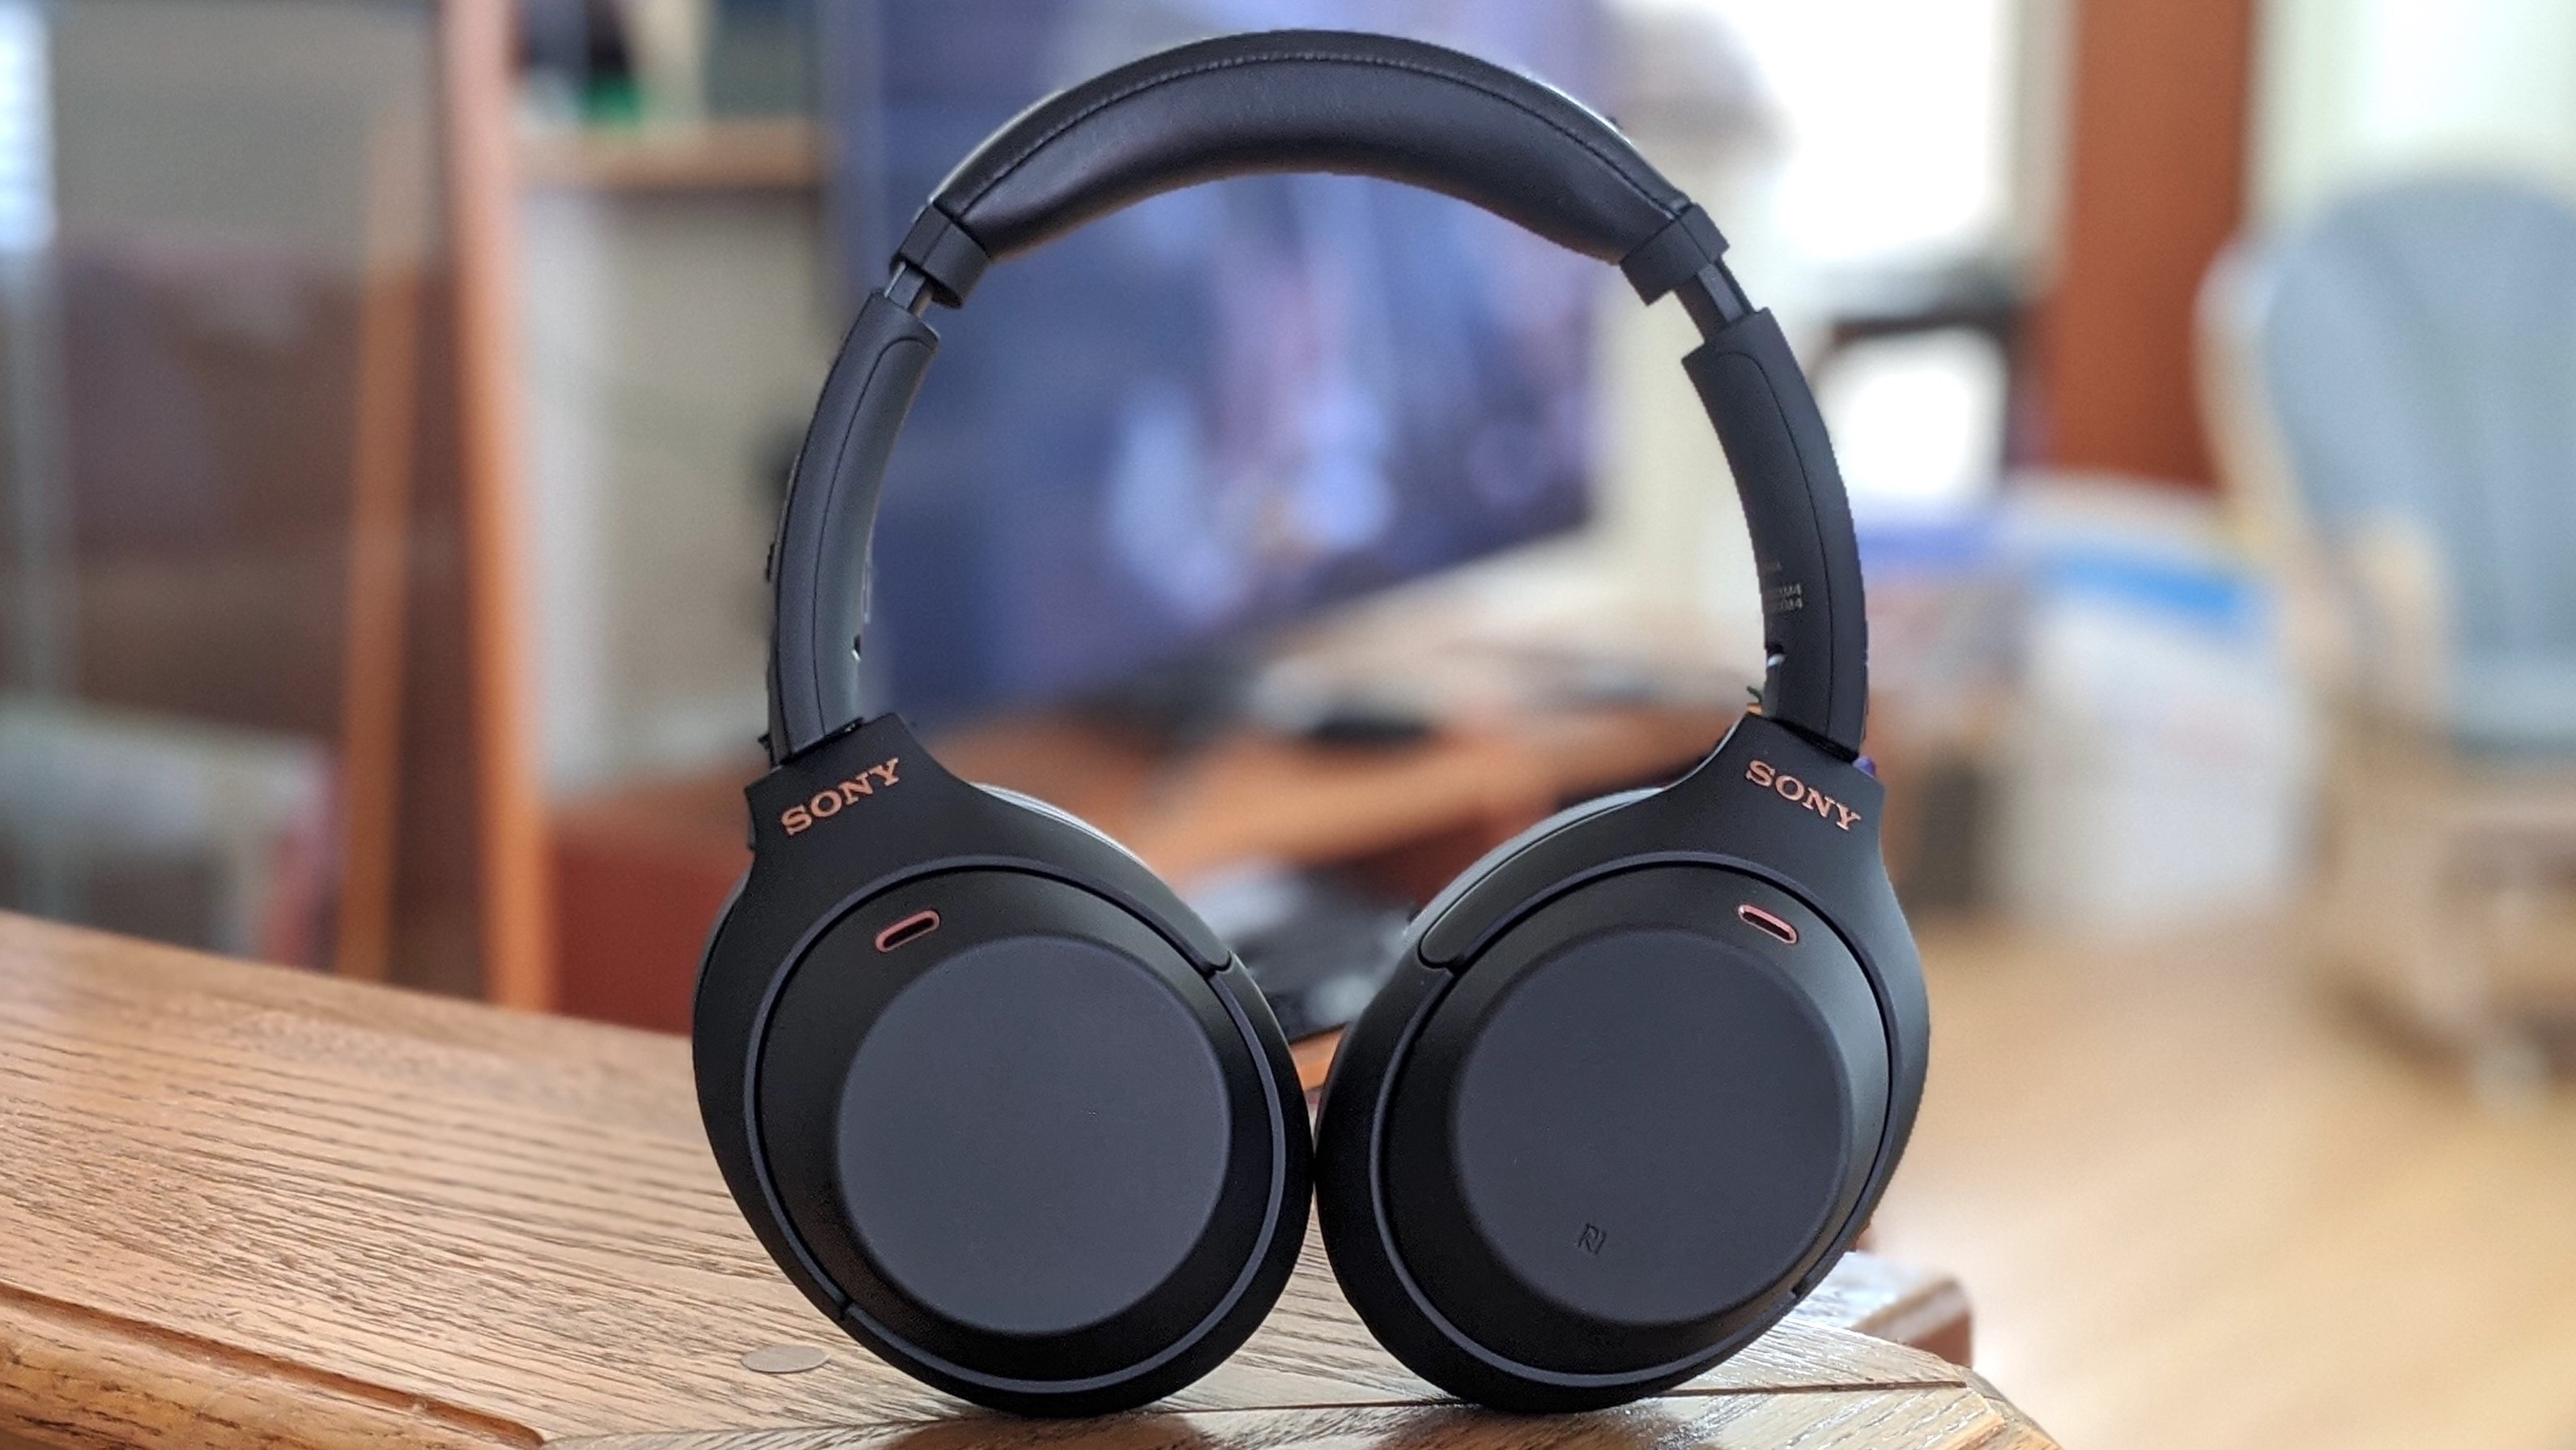 I test headphones for a living and these are the best for travel